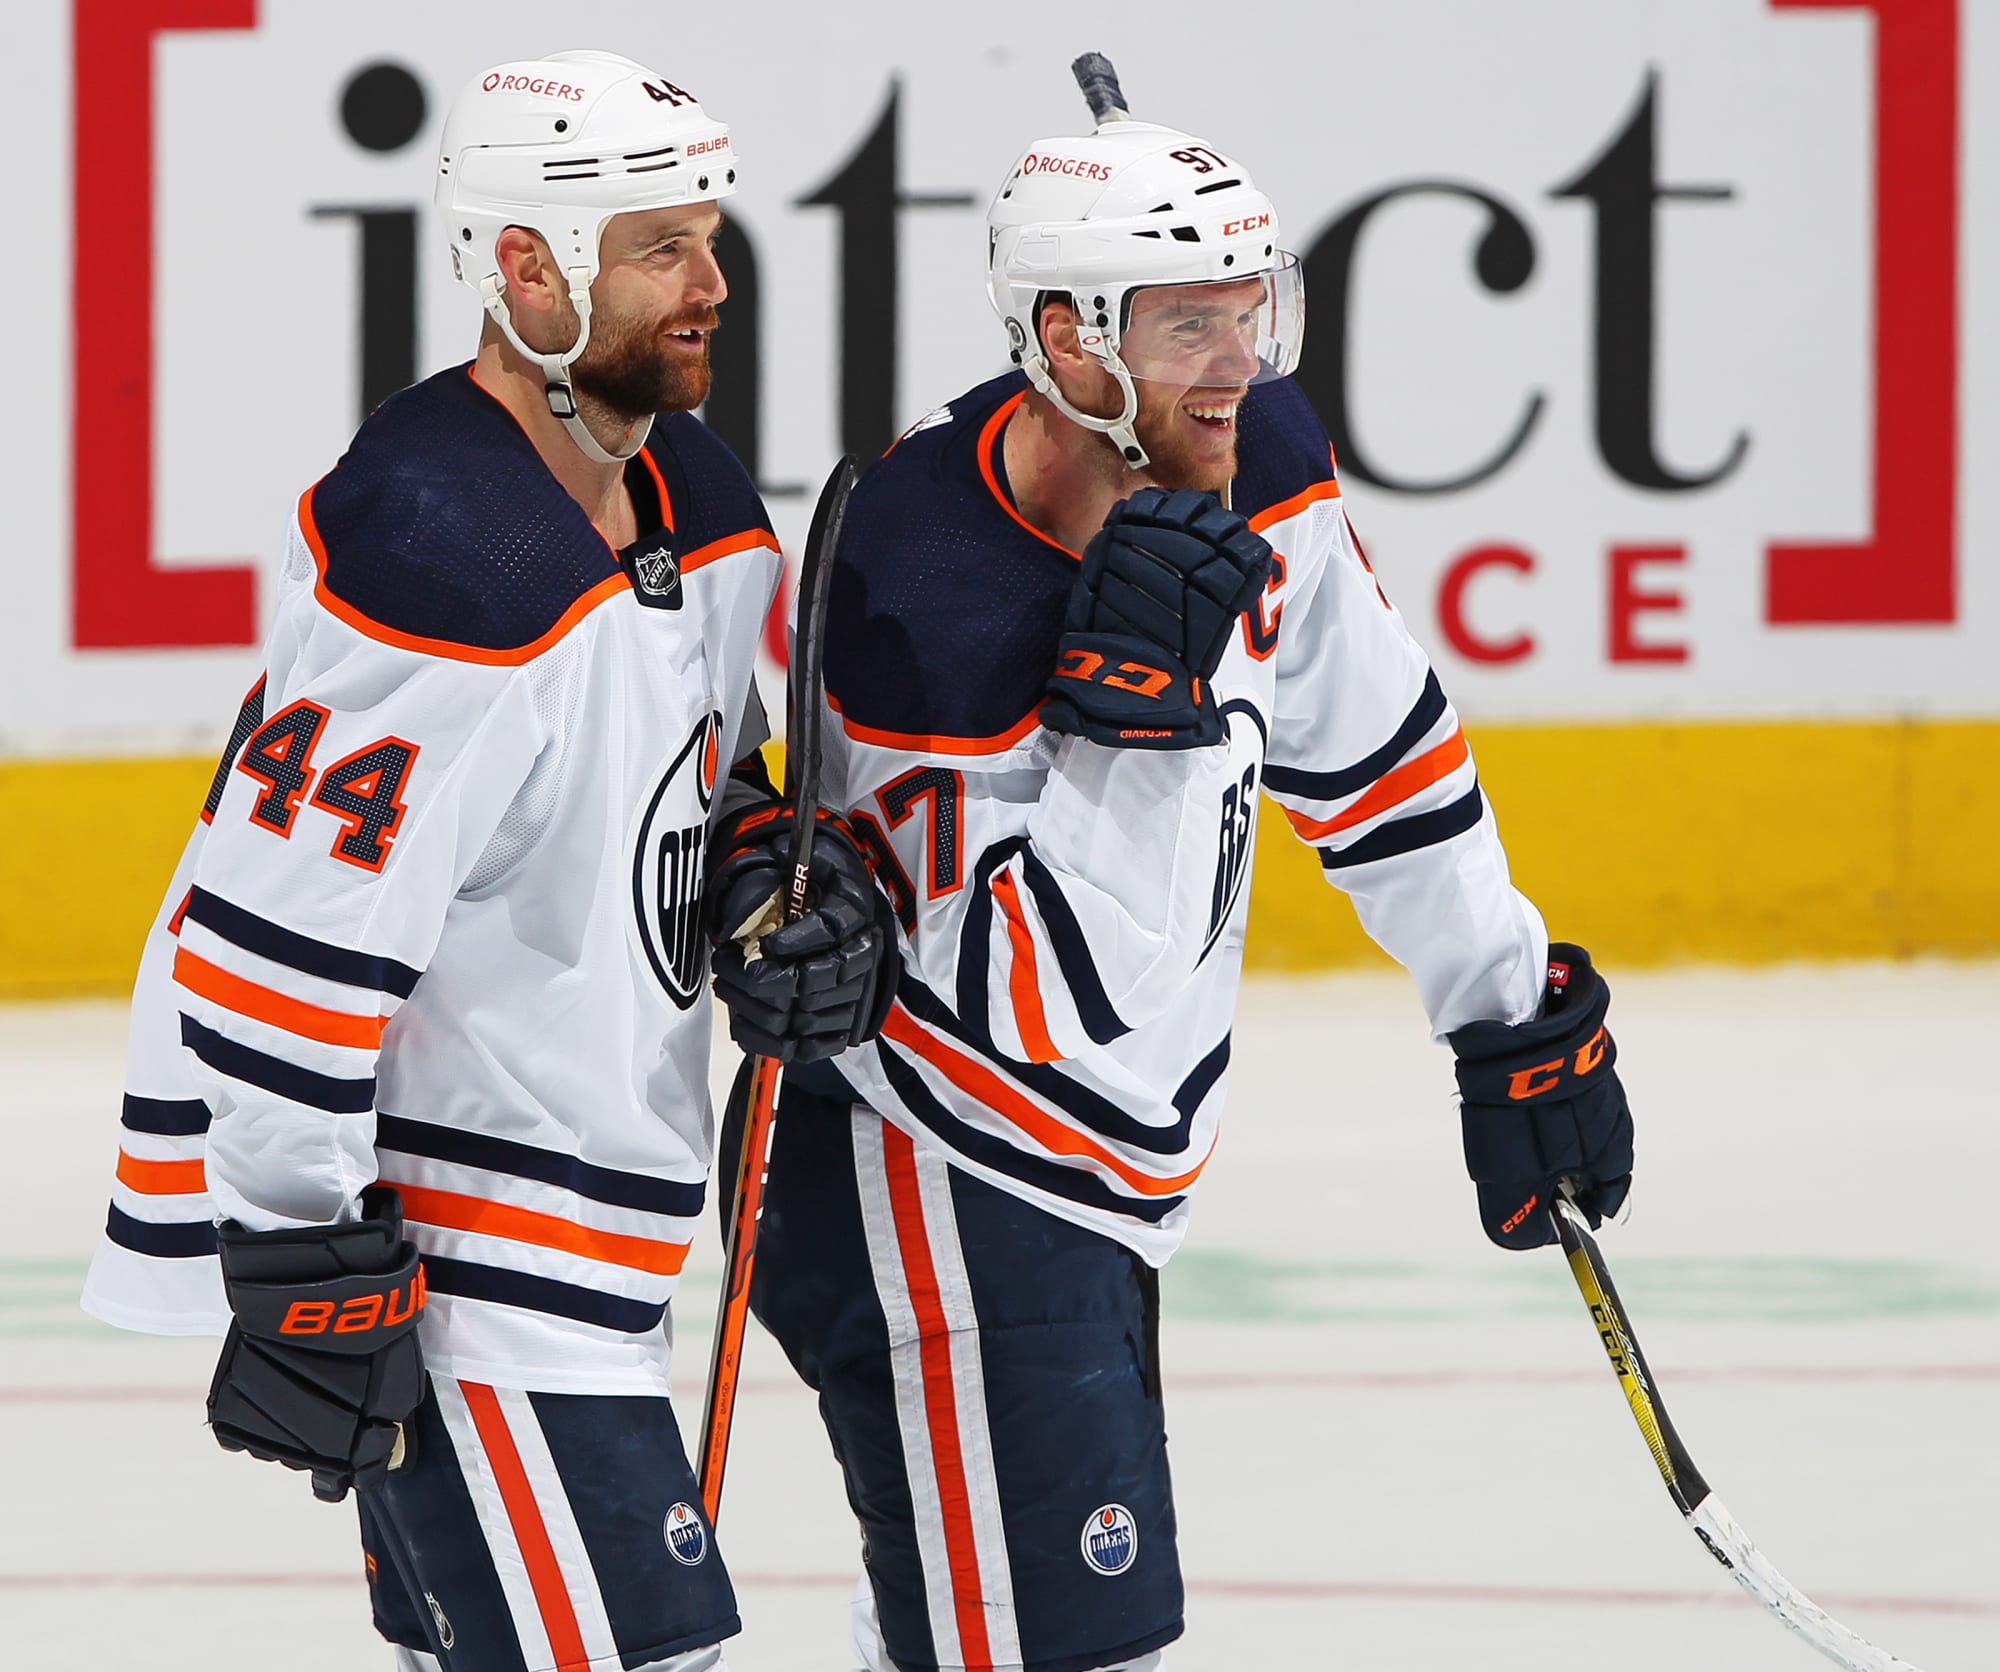 Should Oilers play Connor McDavid, Leon Draisaitl together, or apart?